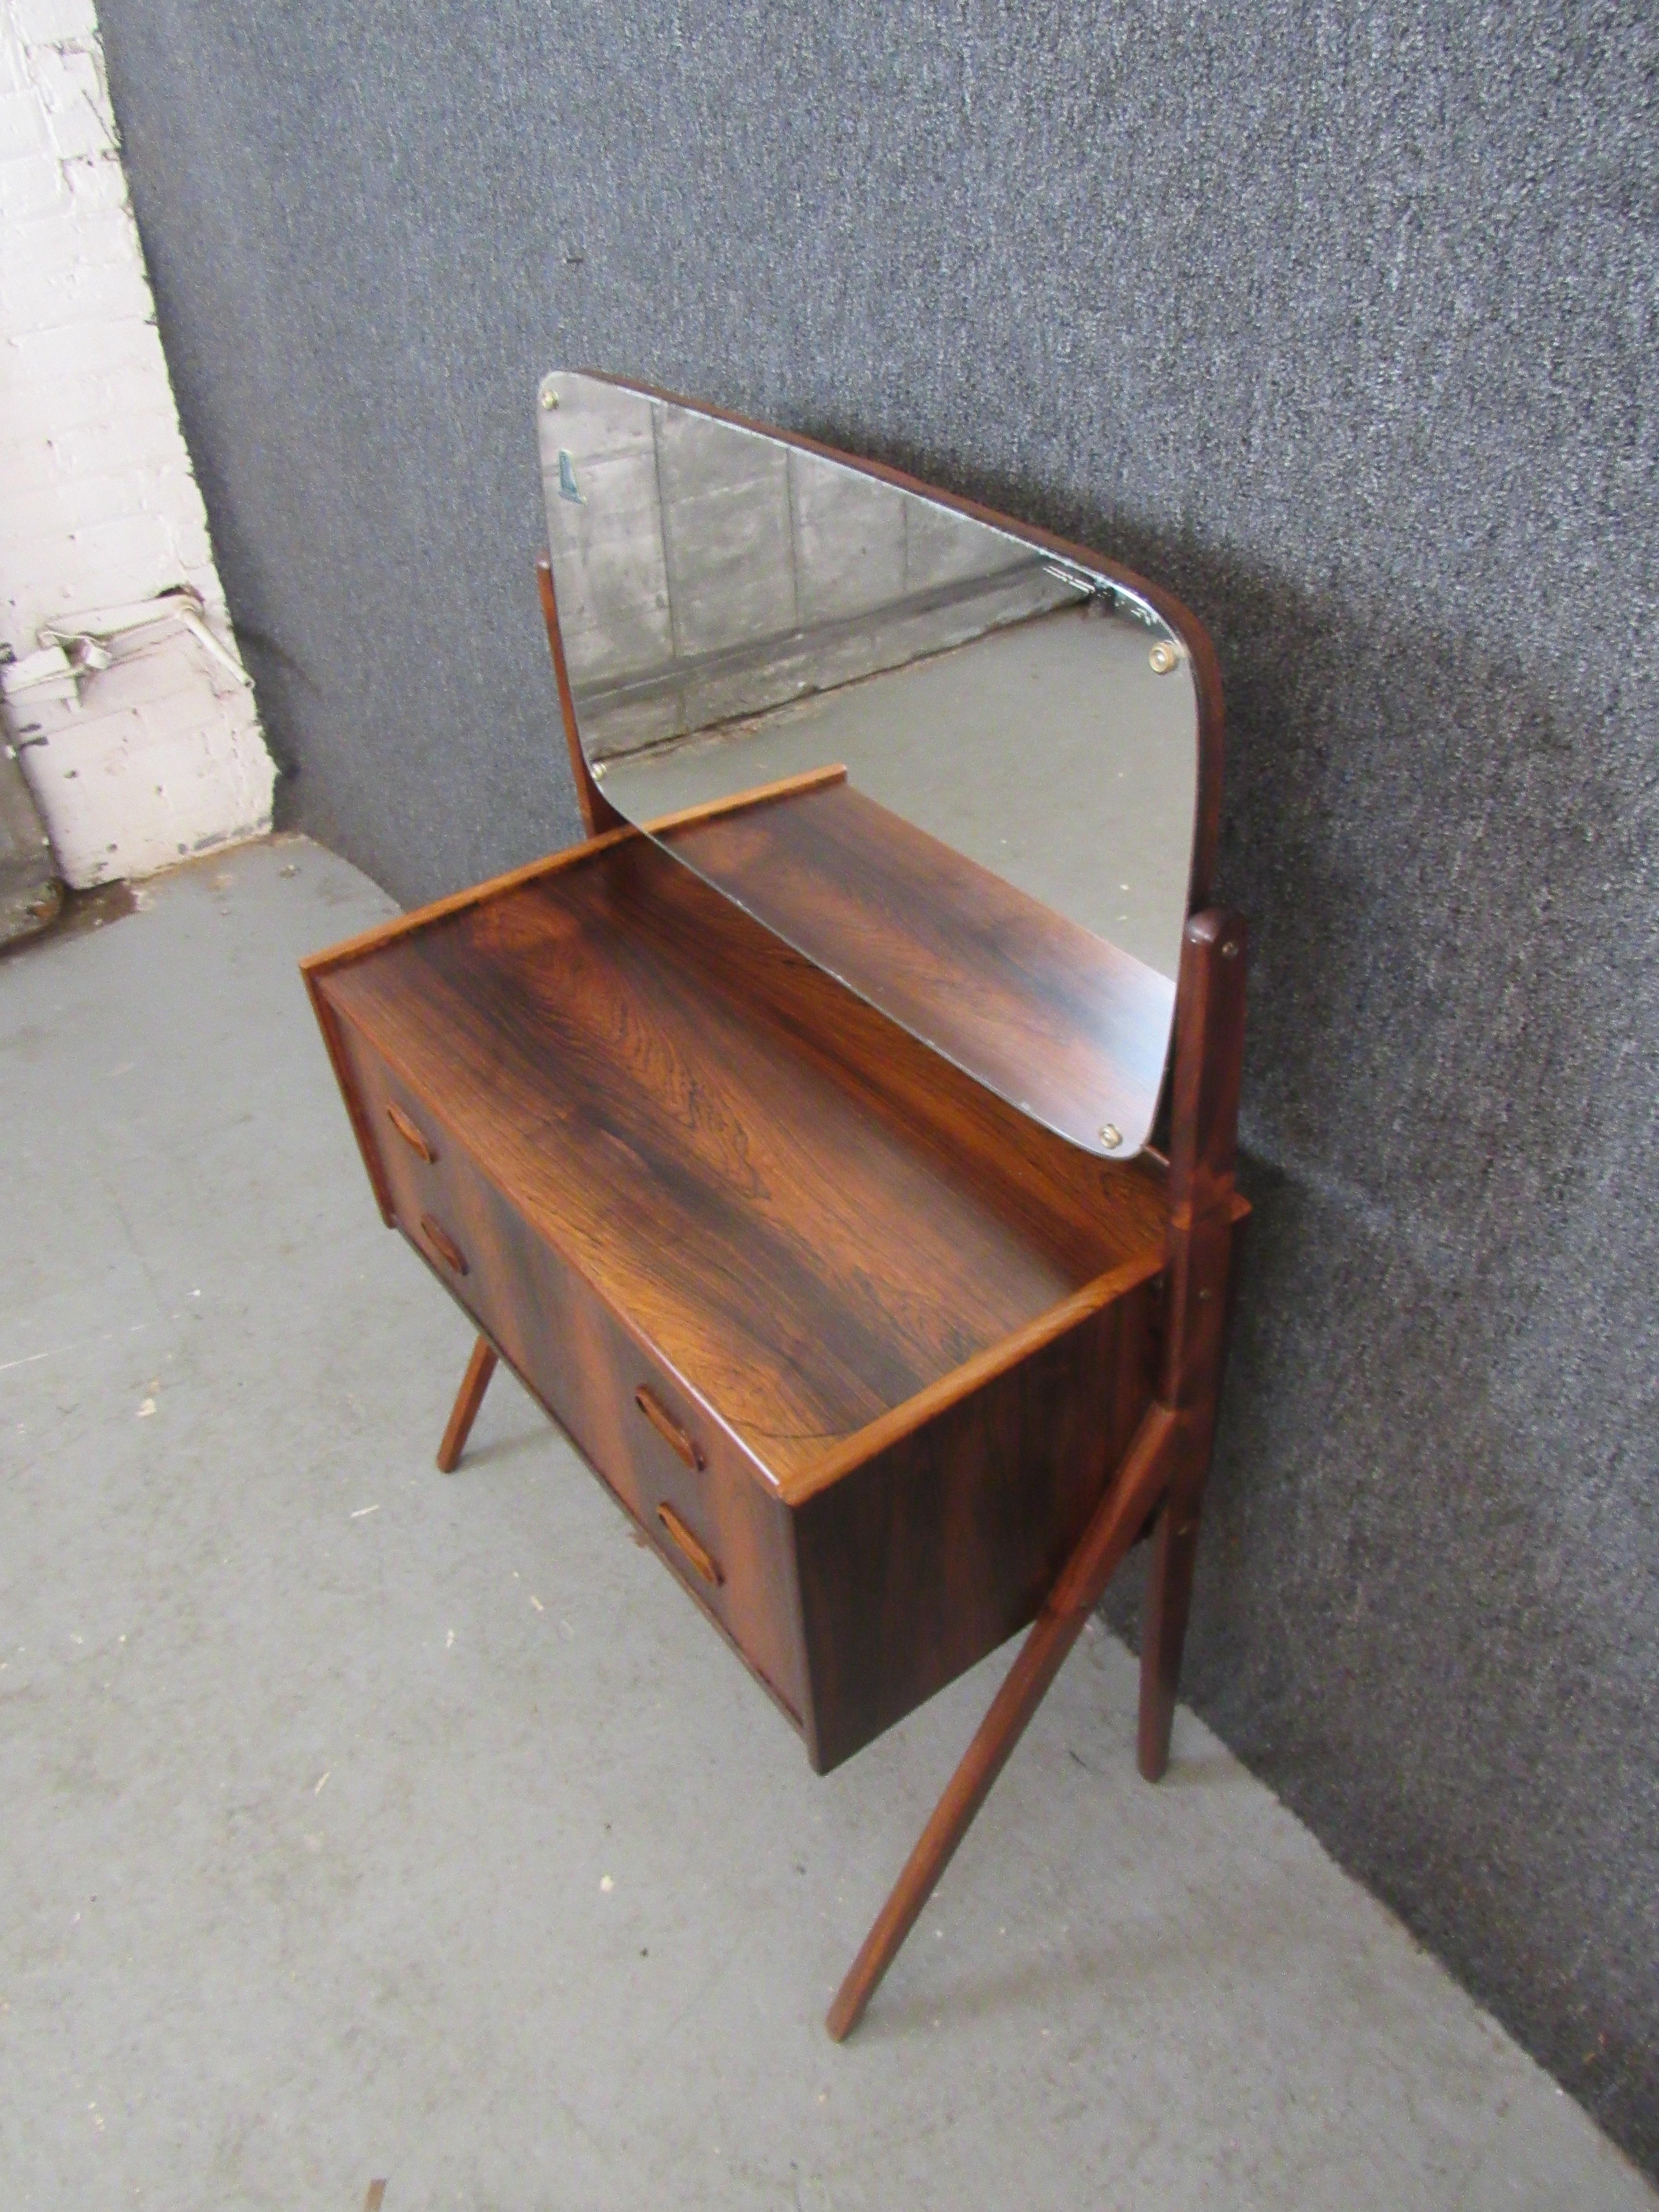 This stunning petite Danish rosewood vanity packs a big appearance into a compact package. Two sculpted wooden 